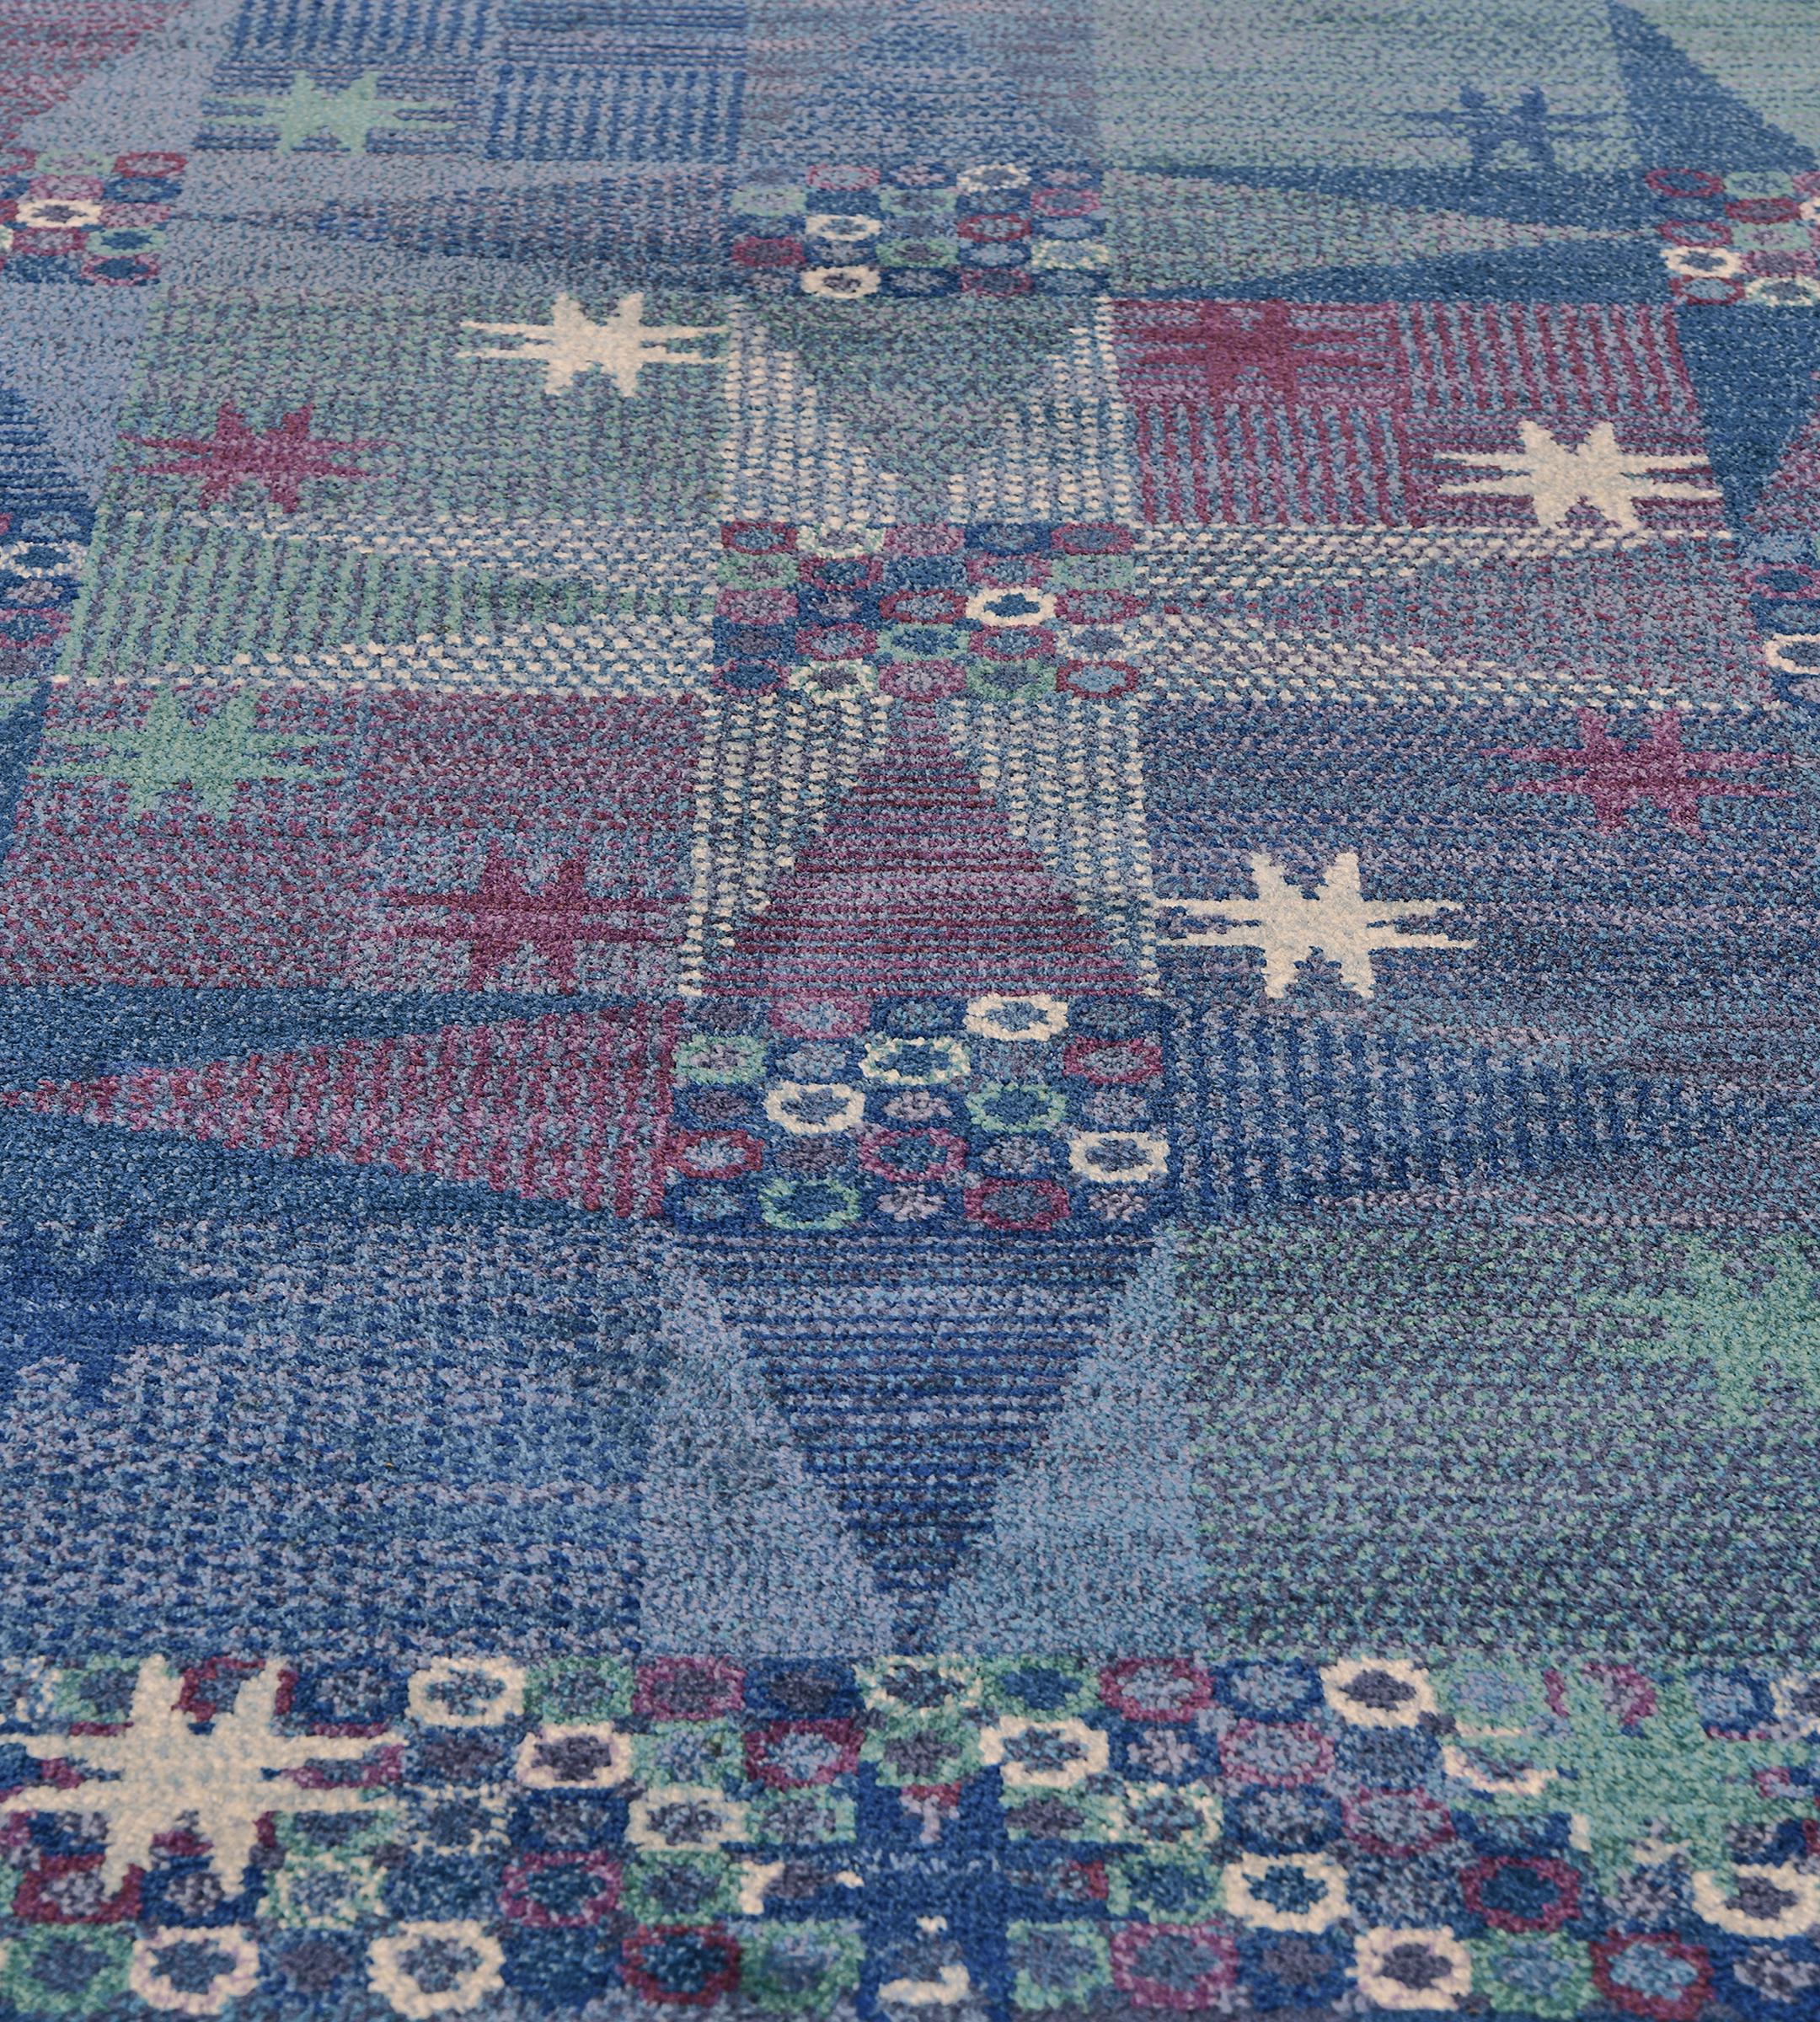 Wool Mid-20th Century Marta Maas-Fjetterström AB Swedish Rug by Barbro Nilsson For Sale